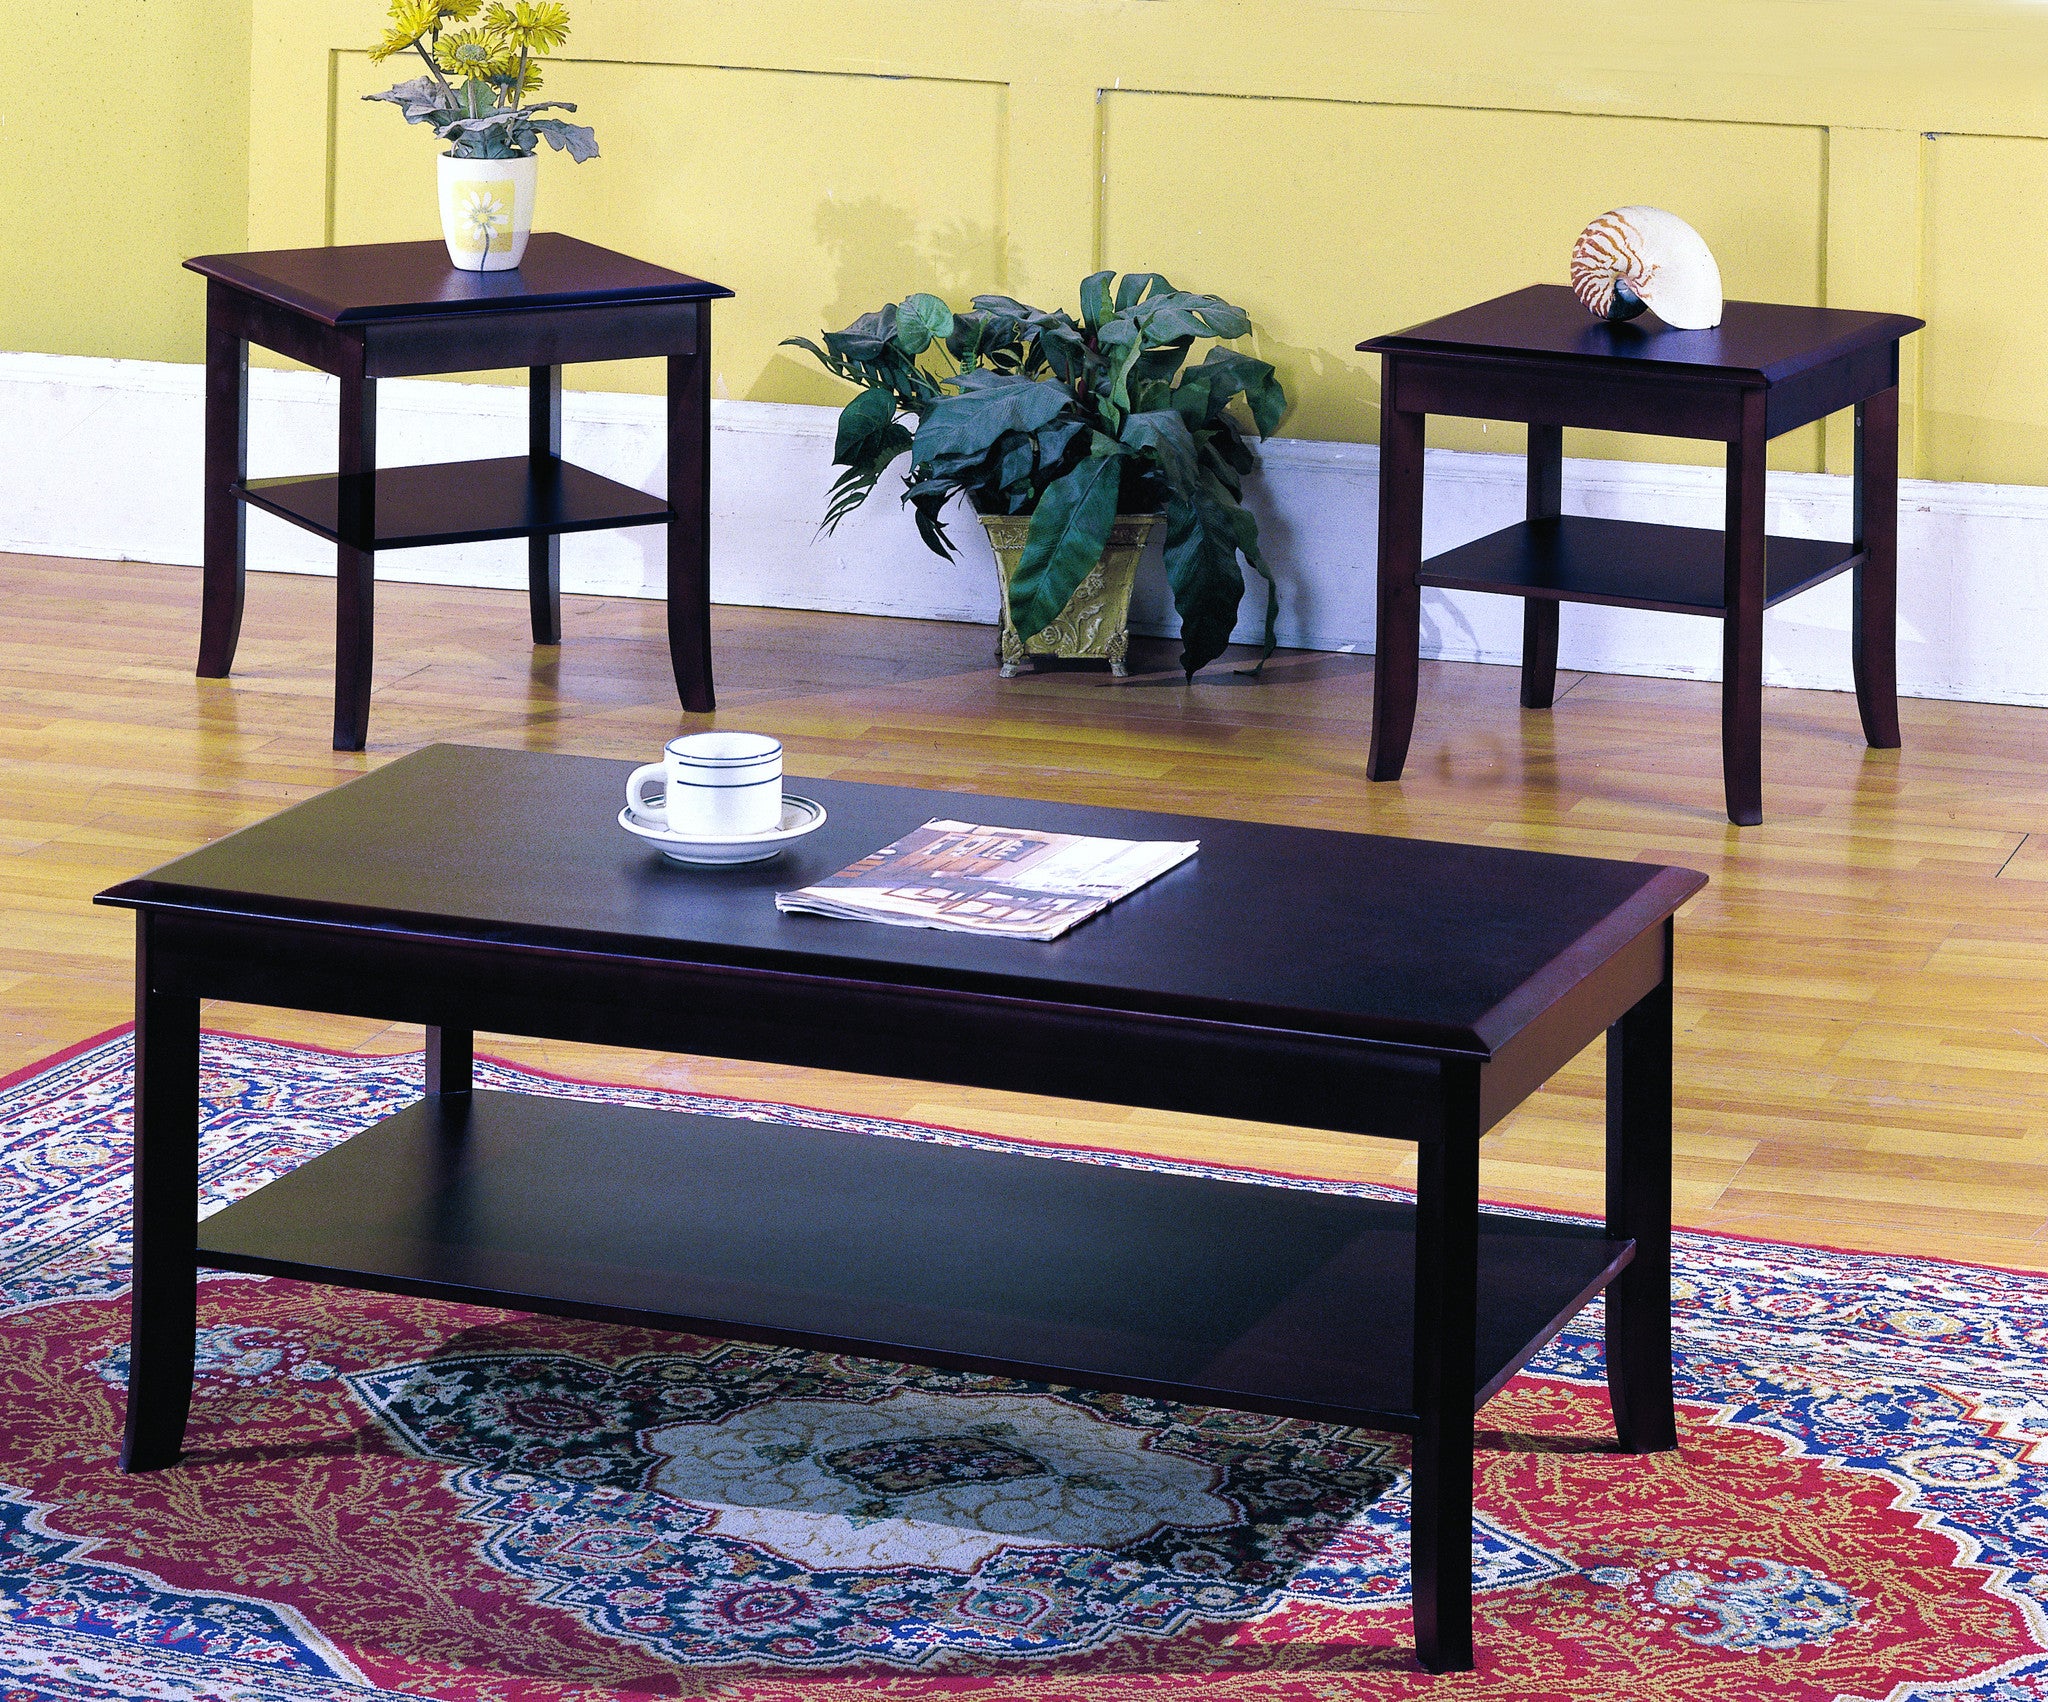 Vania 3 Piece Coffee Table Set Dark Cherry Wood With Storage Shelves Contemporary Cocktail Coffee 2 End Tables Pilaster Designs